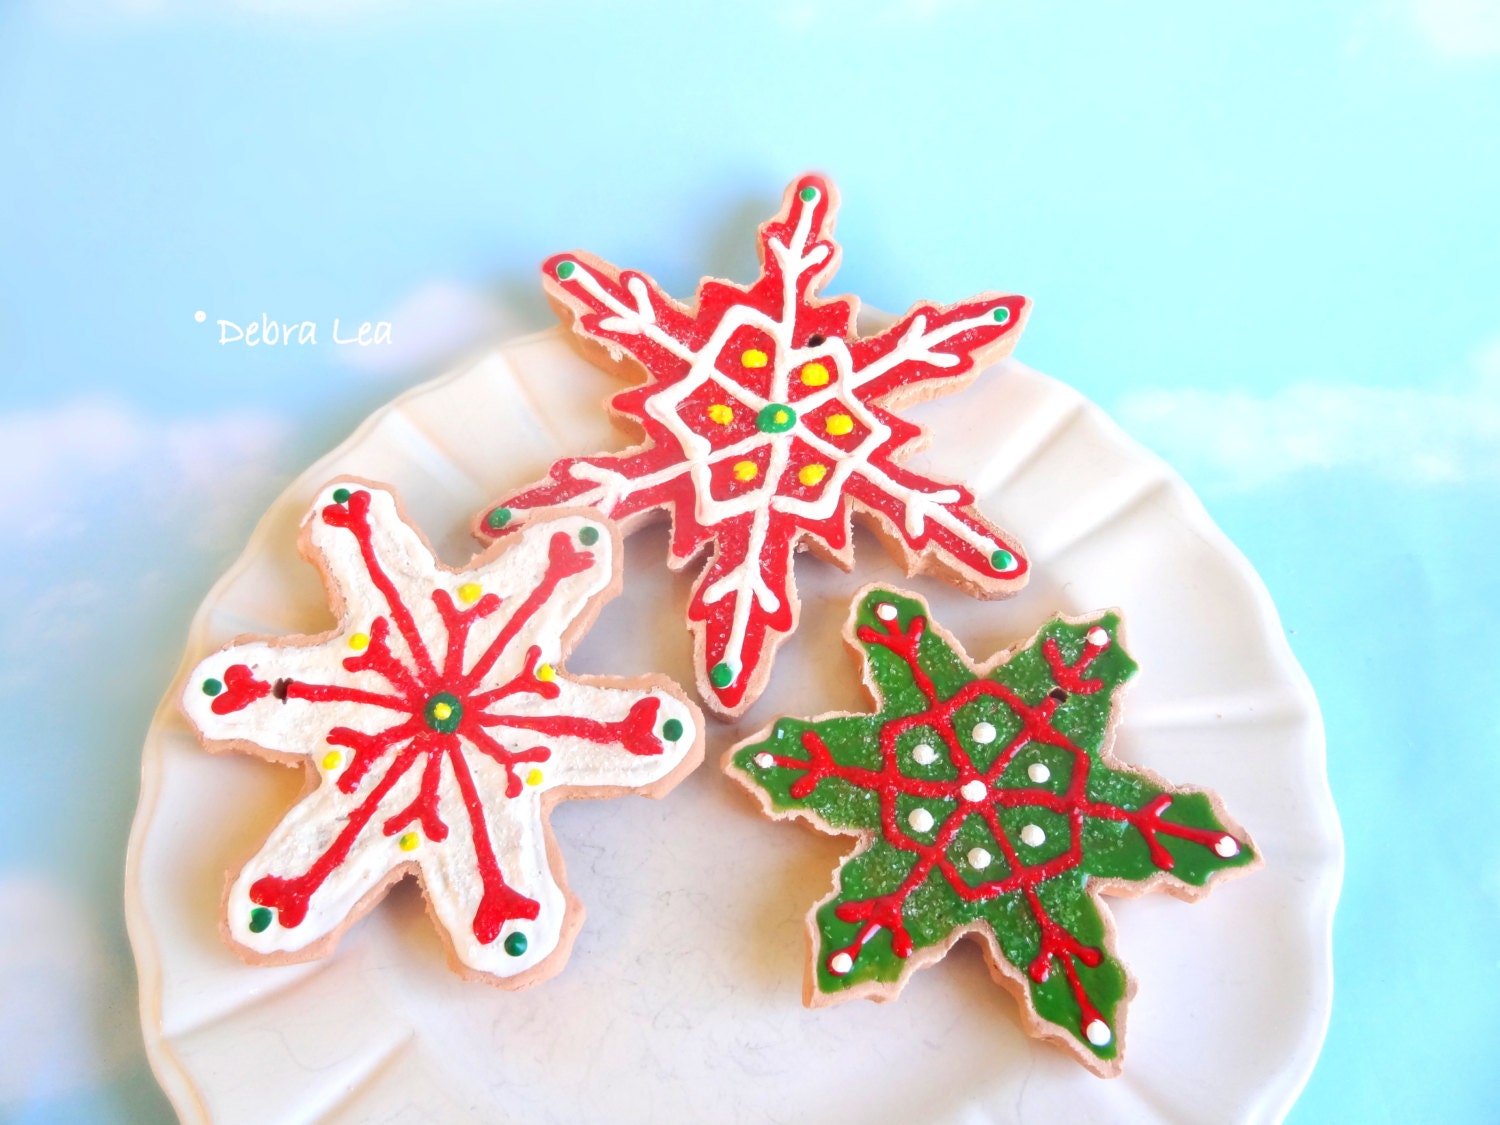 Fake Cookies Set of 3 Handmade Faux Christmas Holiday Gingerbread Sugar Cookie Ornament Candy Cane Peppermint Snowflake C14